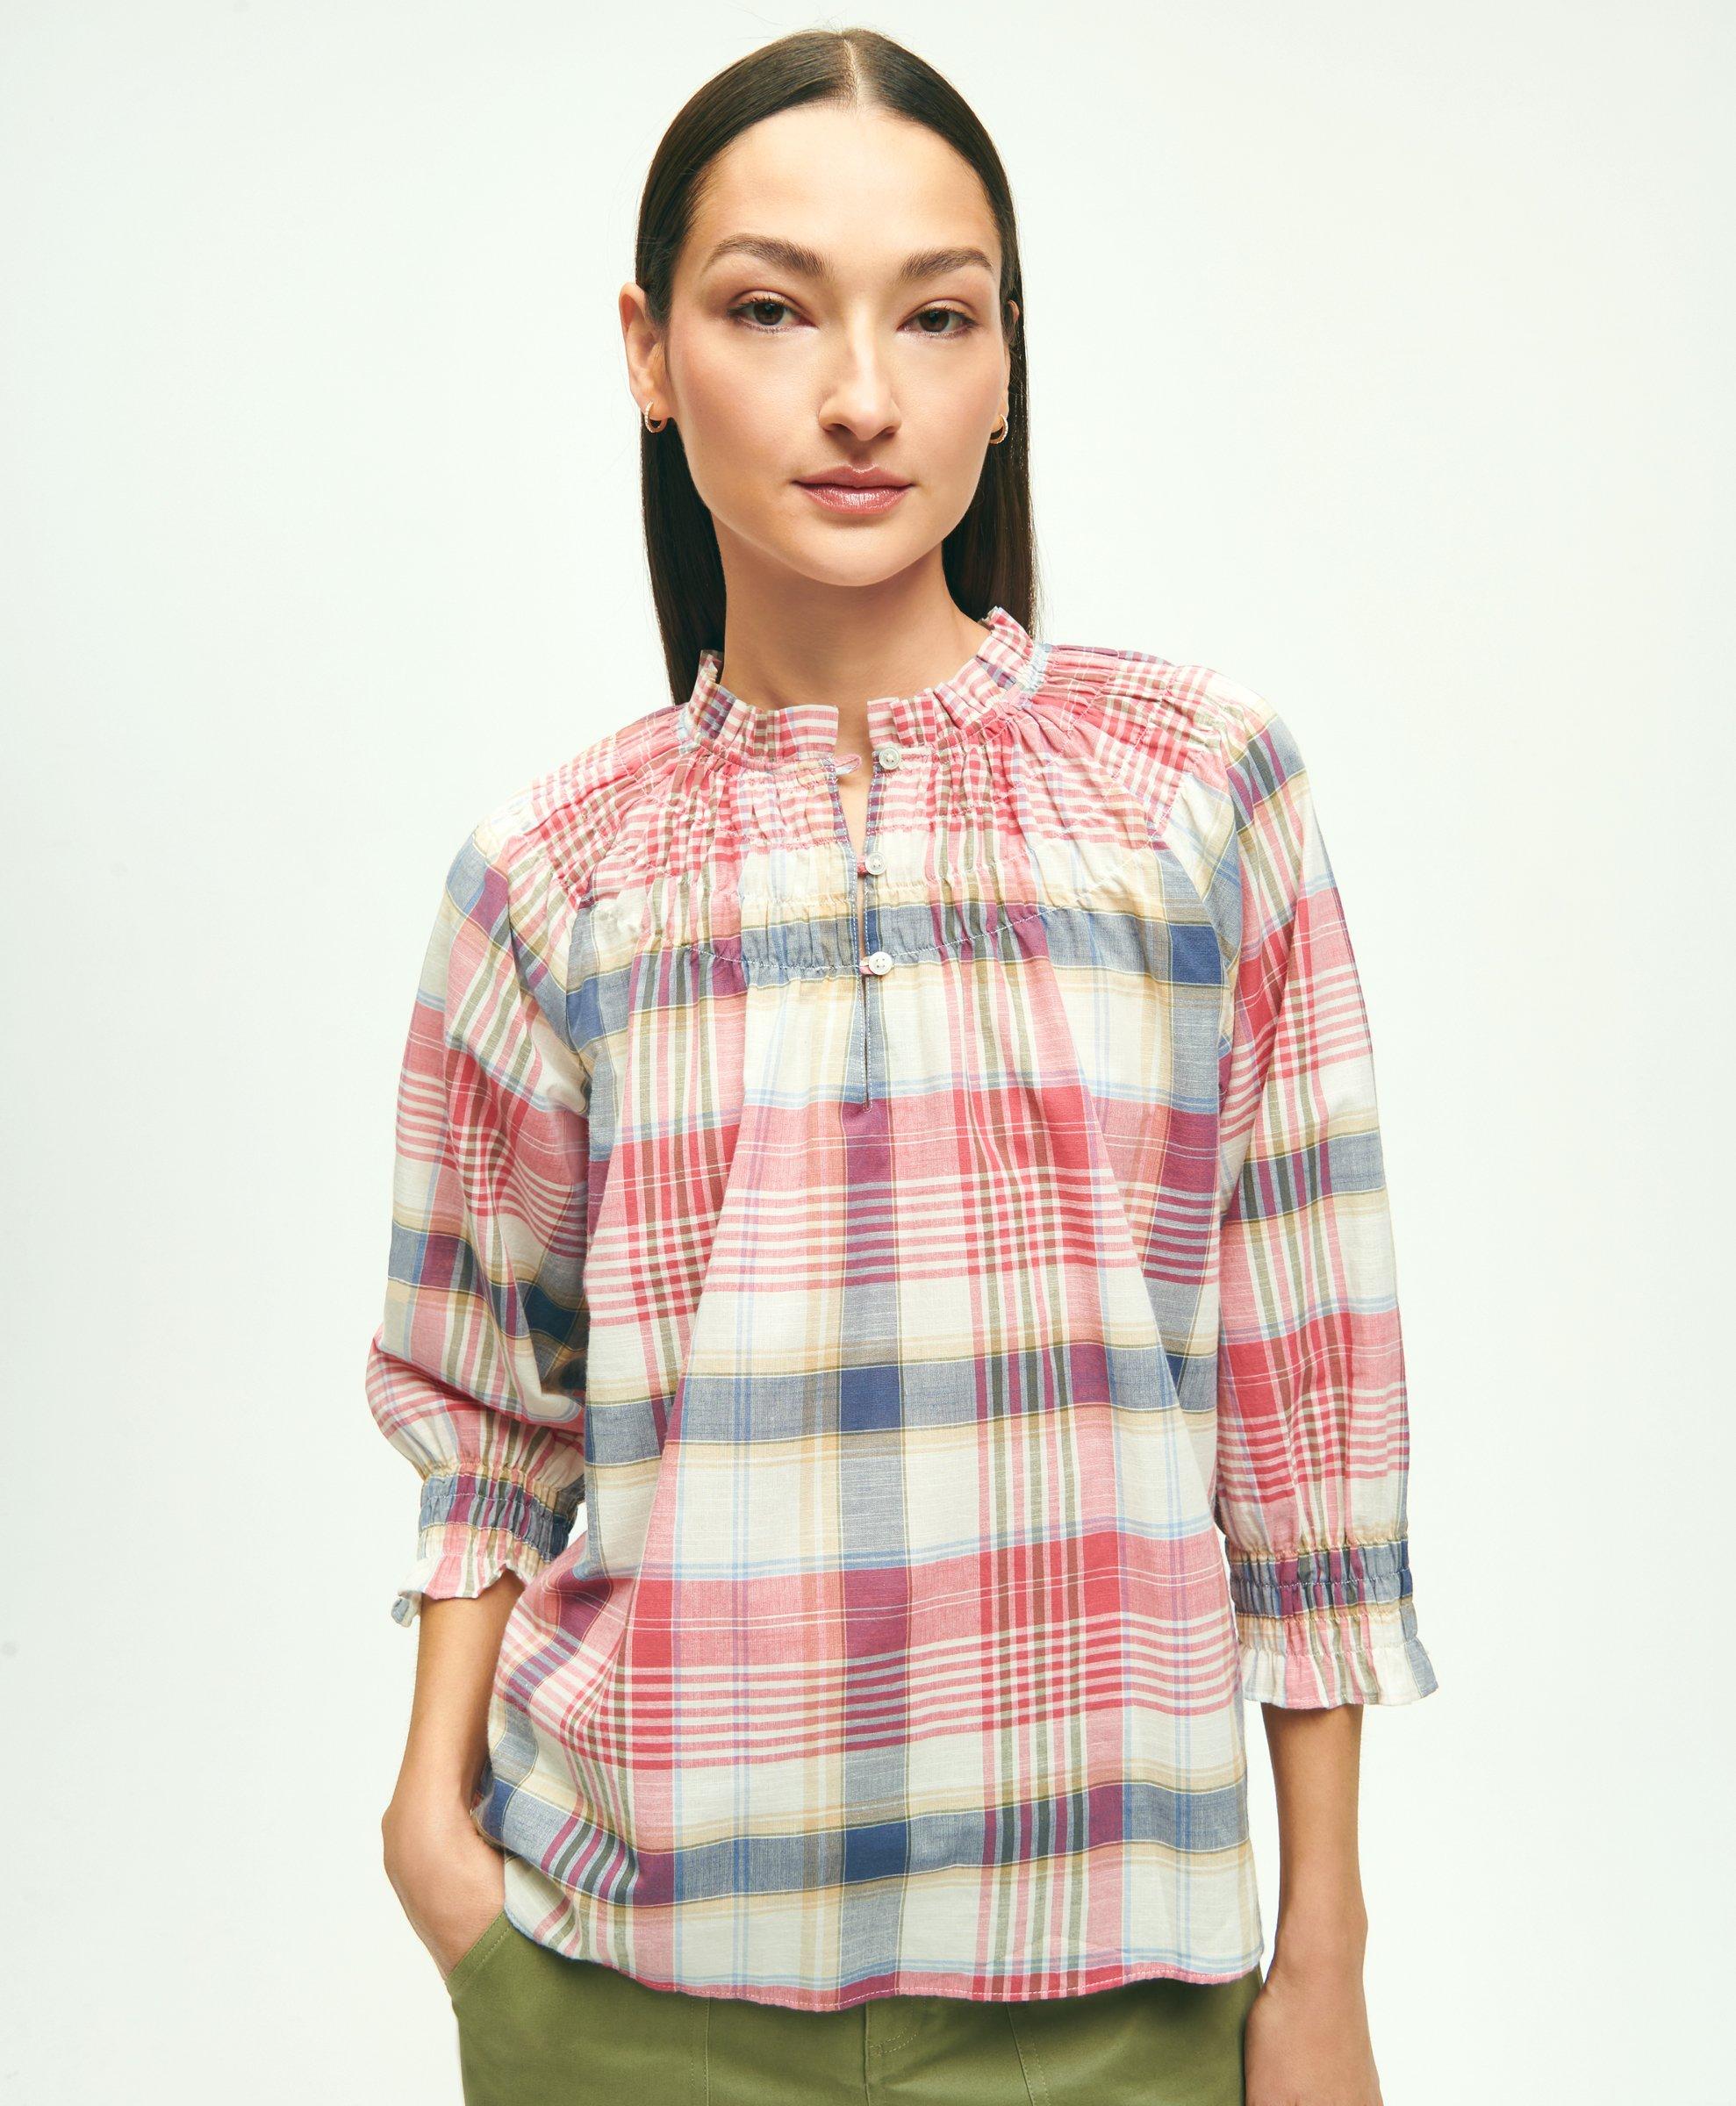 This summer embrace Madras checks in clothing from your